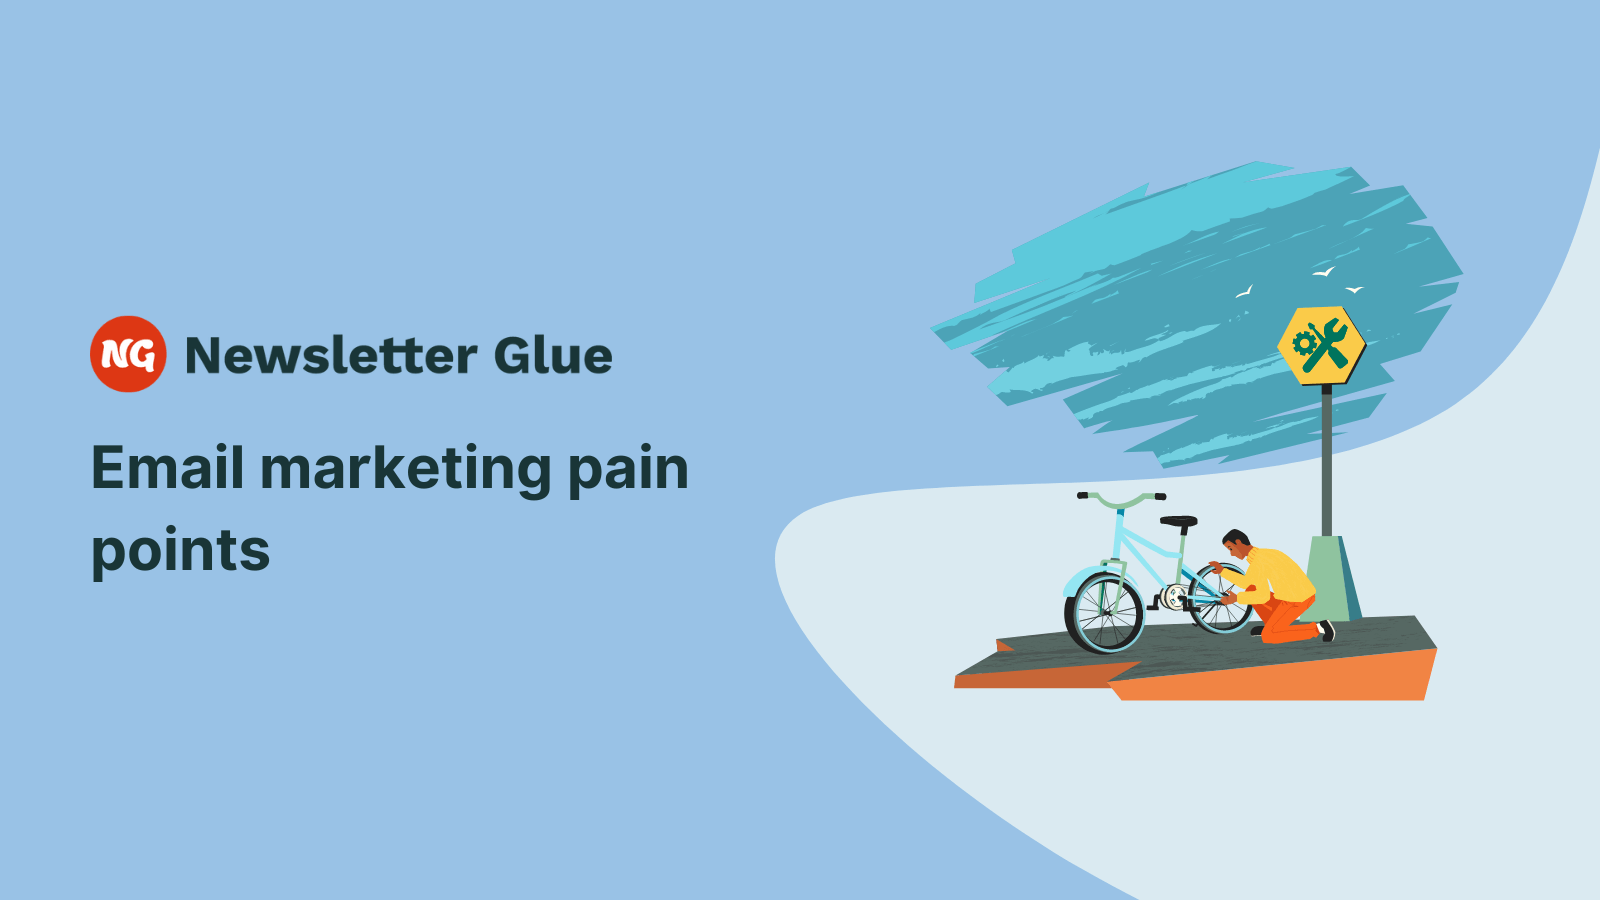 Email marketing pain points